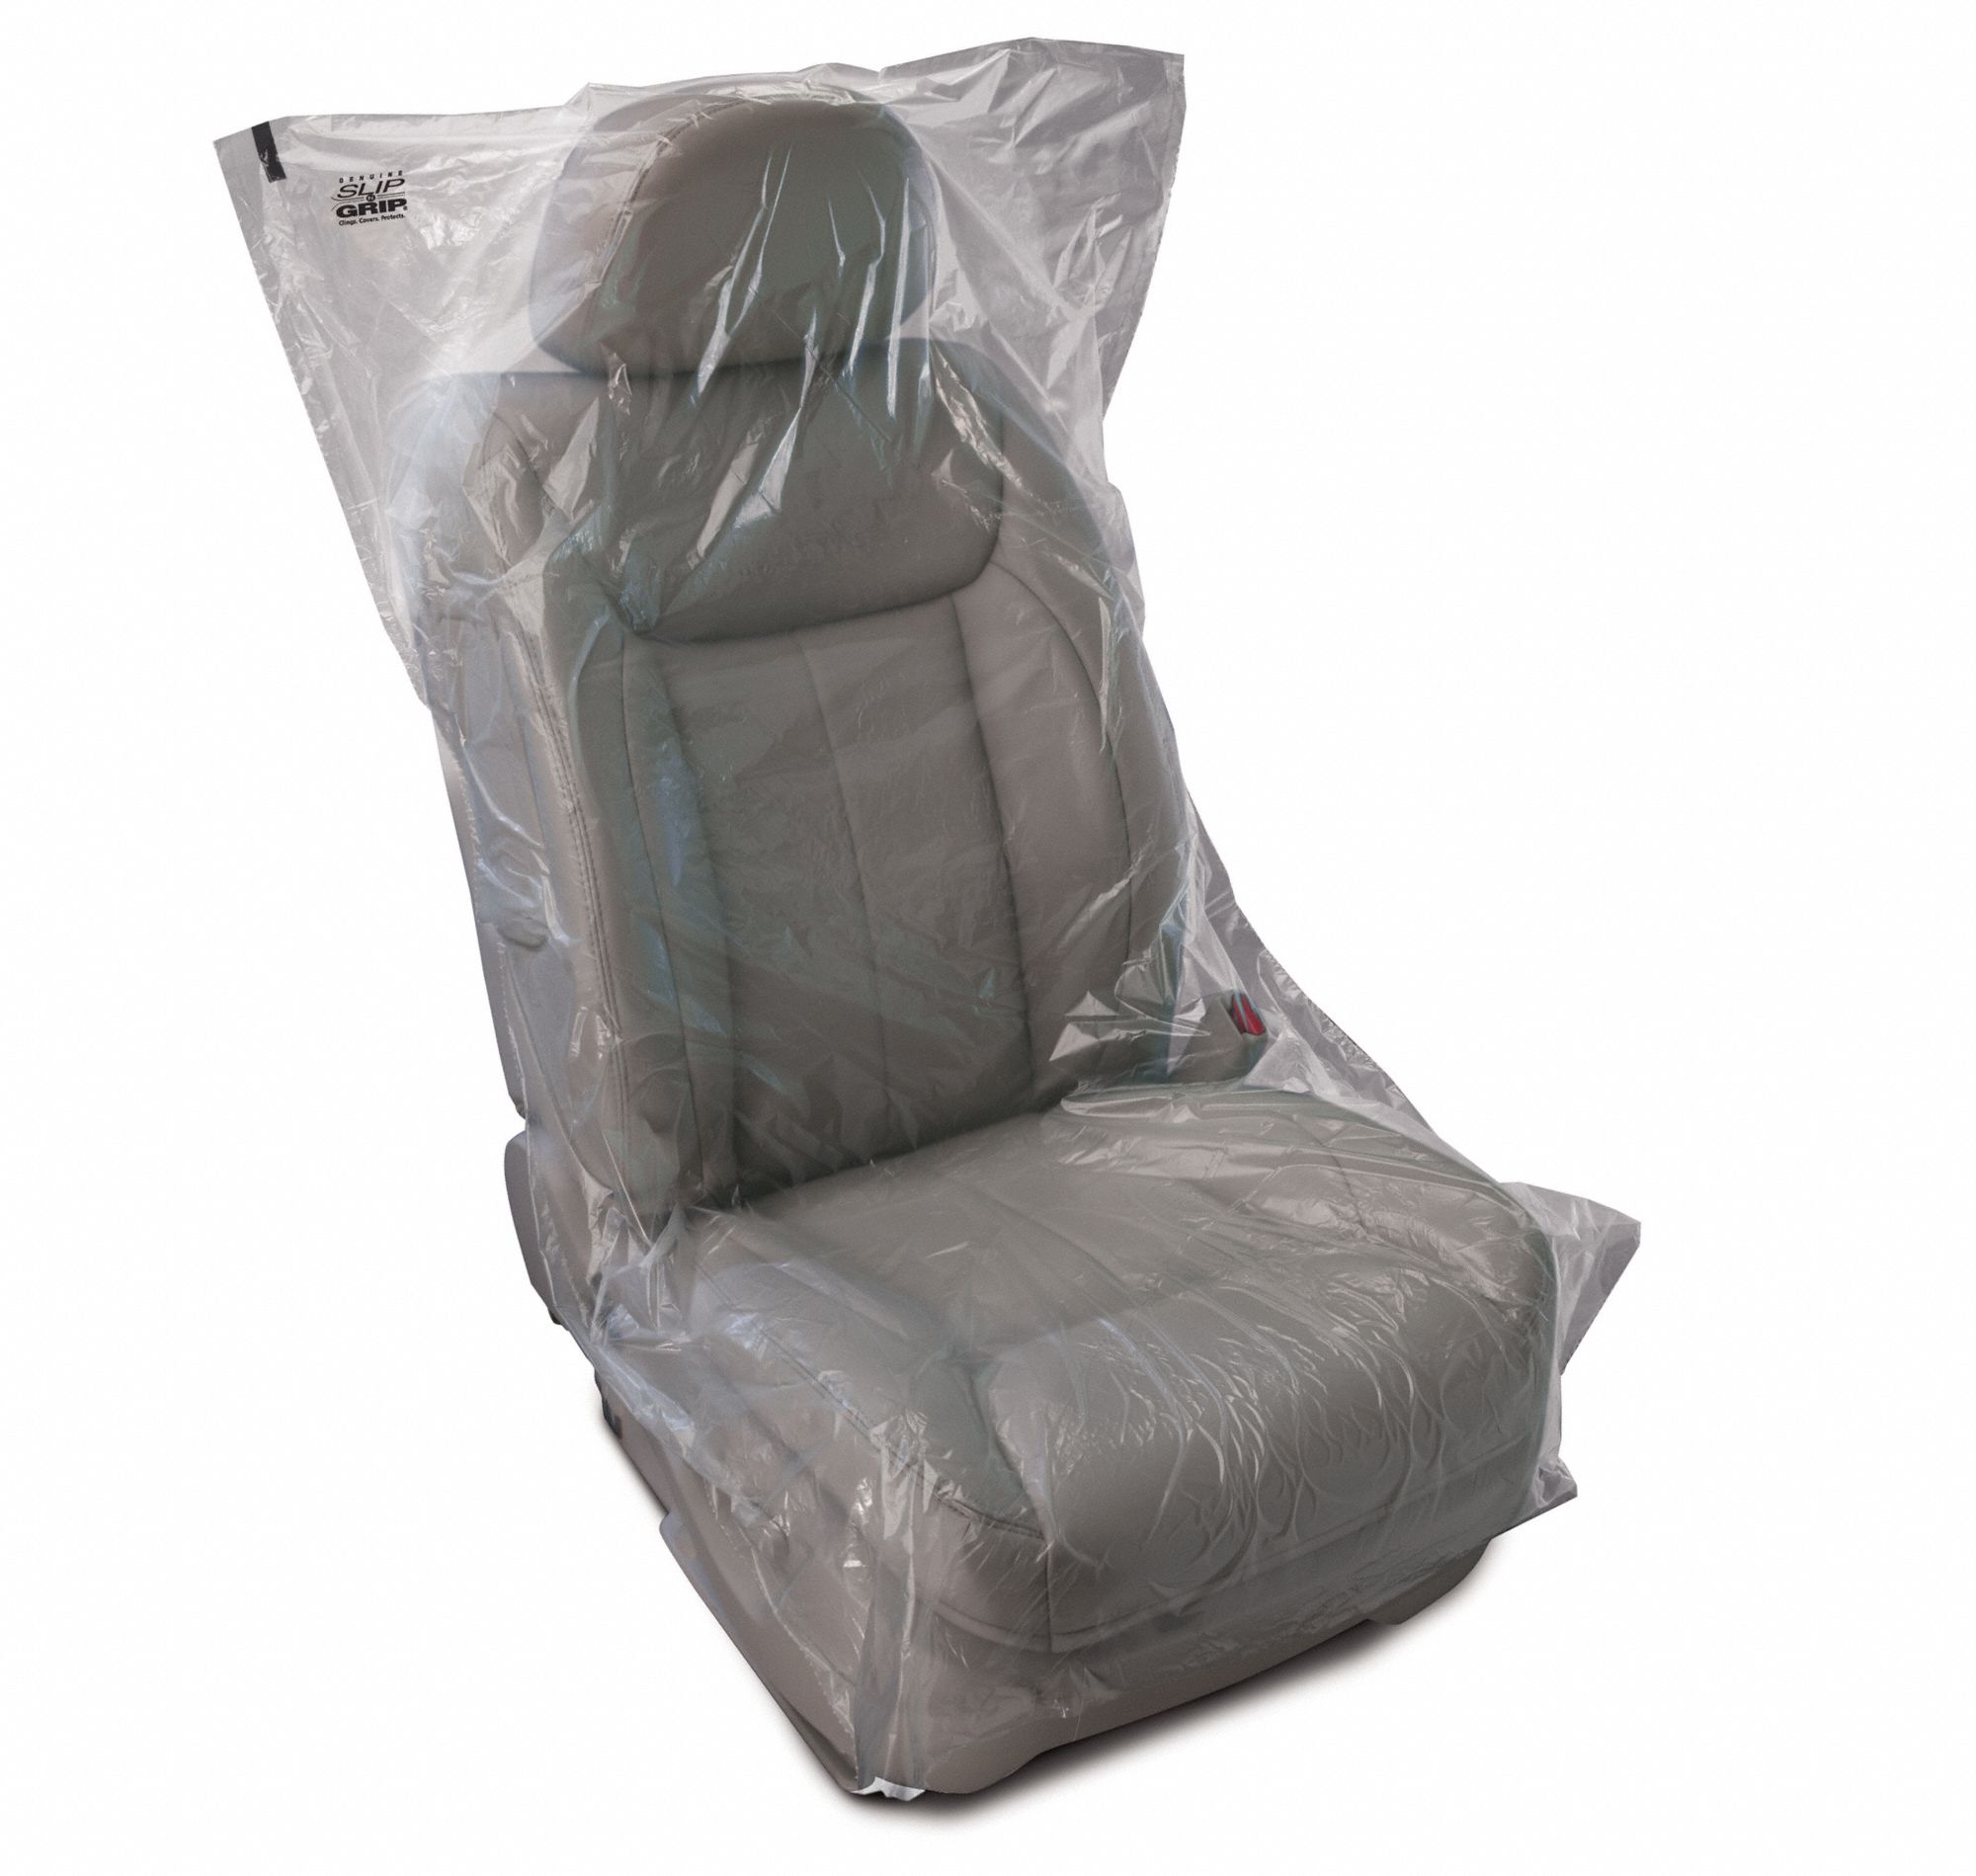 Seat Cover,  Plastic,  32 in x 56 in,  Clear,  PK 250